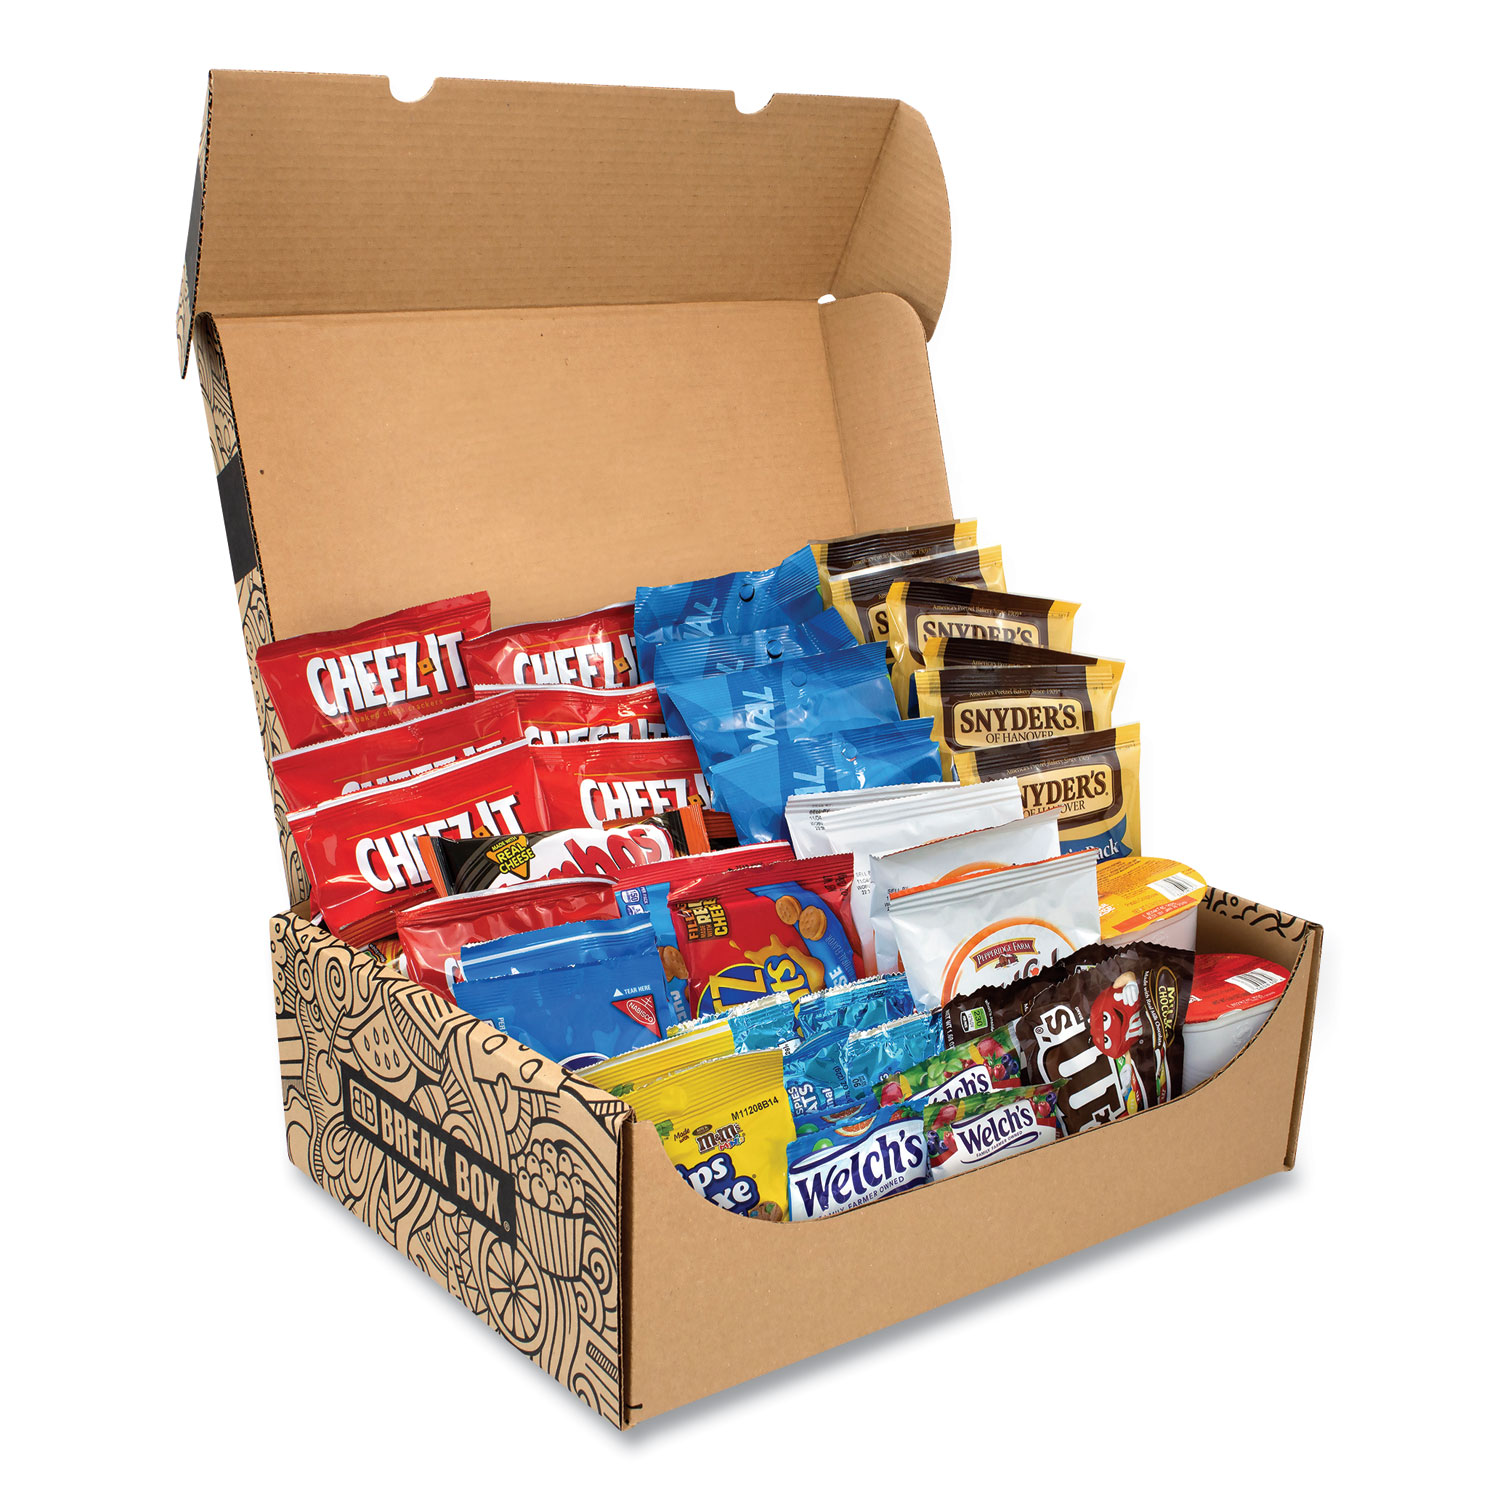  Snack Box Pros 70000003 Party Snack Box, 45 Assorted Snacks, Free Delivery in 1-4 Business Days (GRR700S0003) 